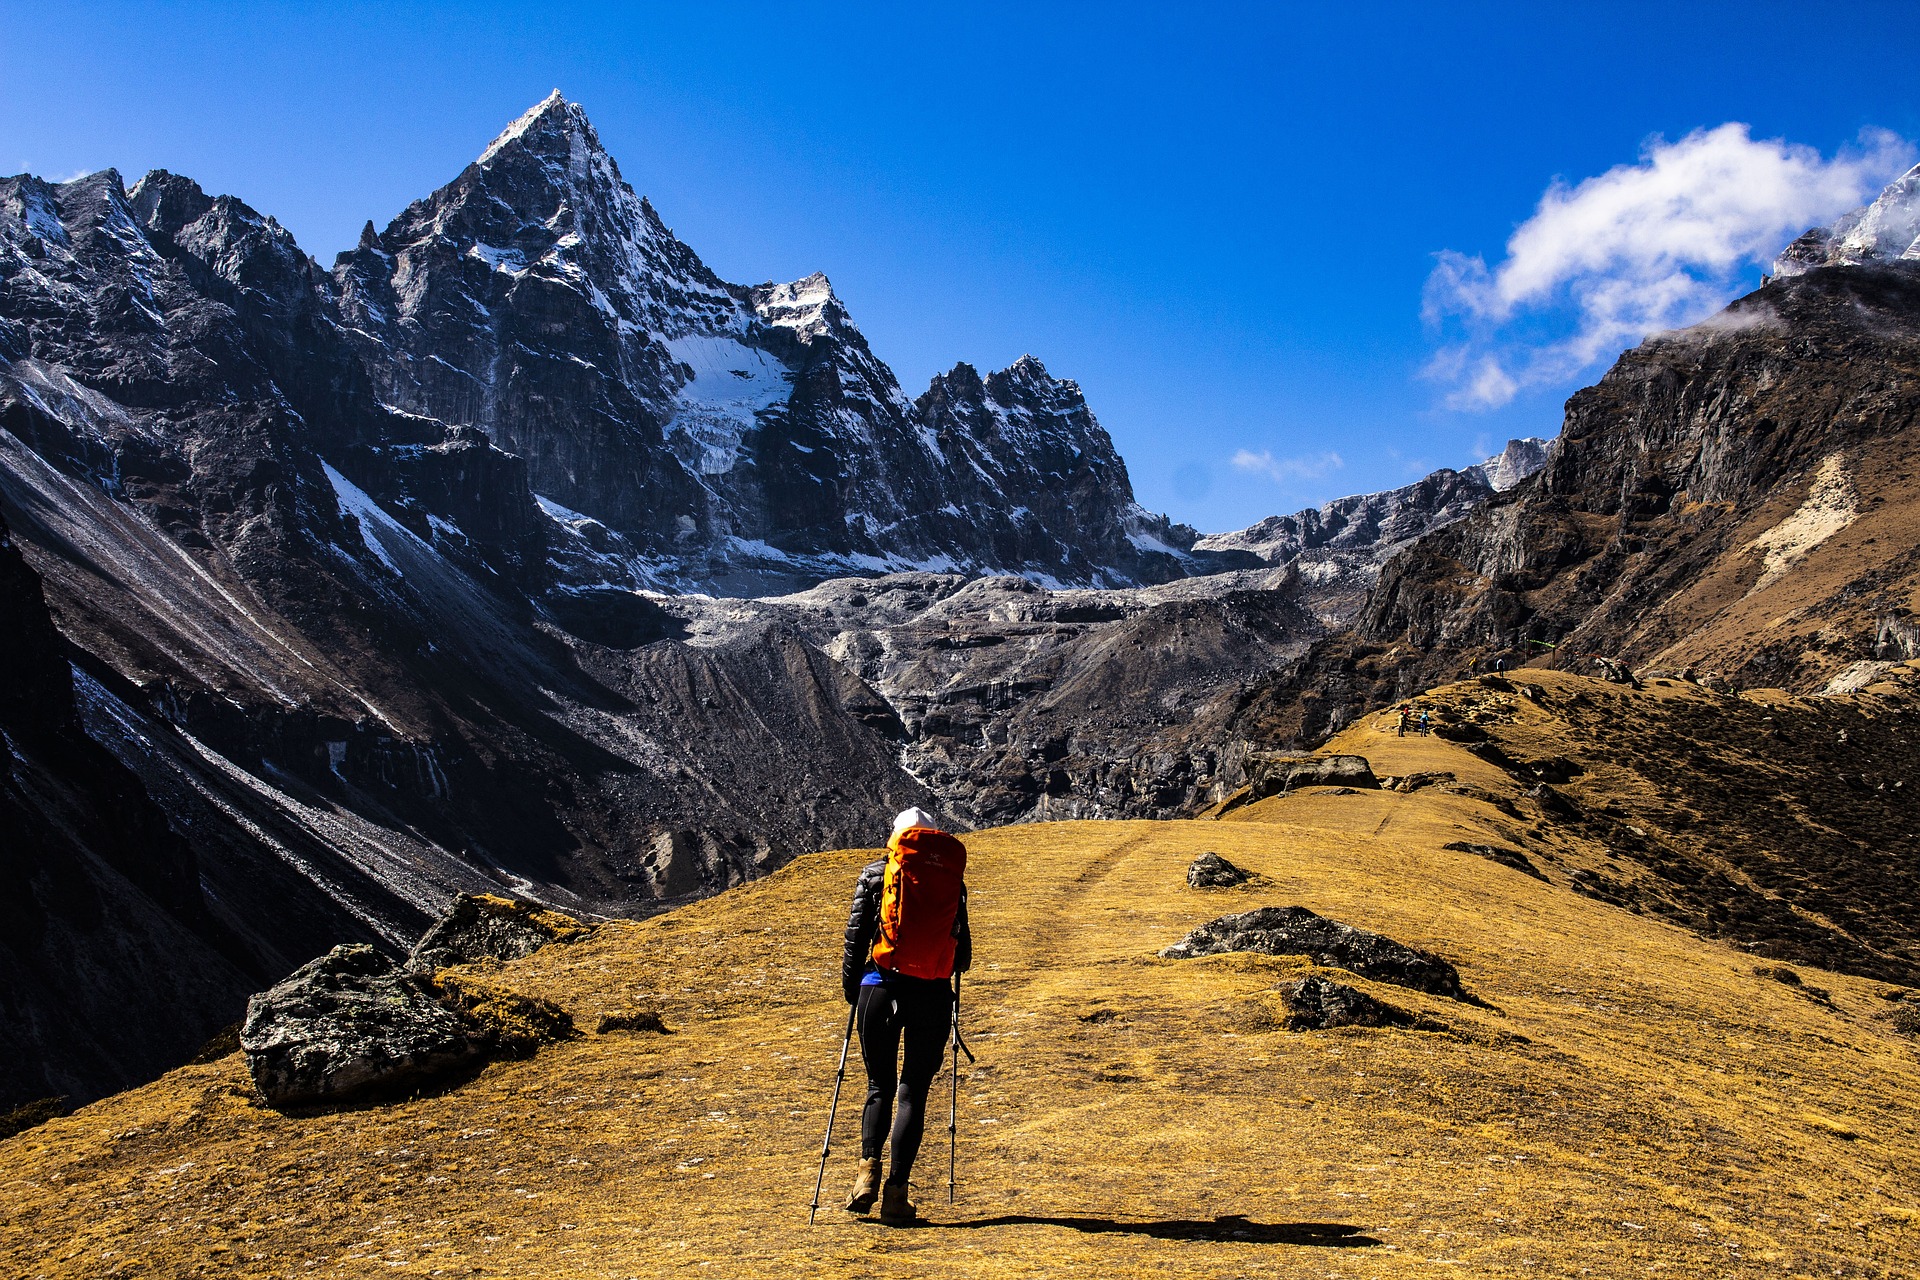 When is the Best Time to Travel to Nepal?